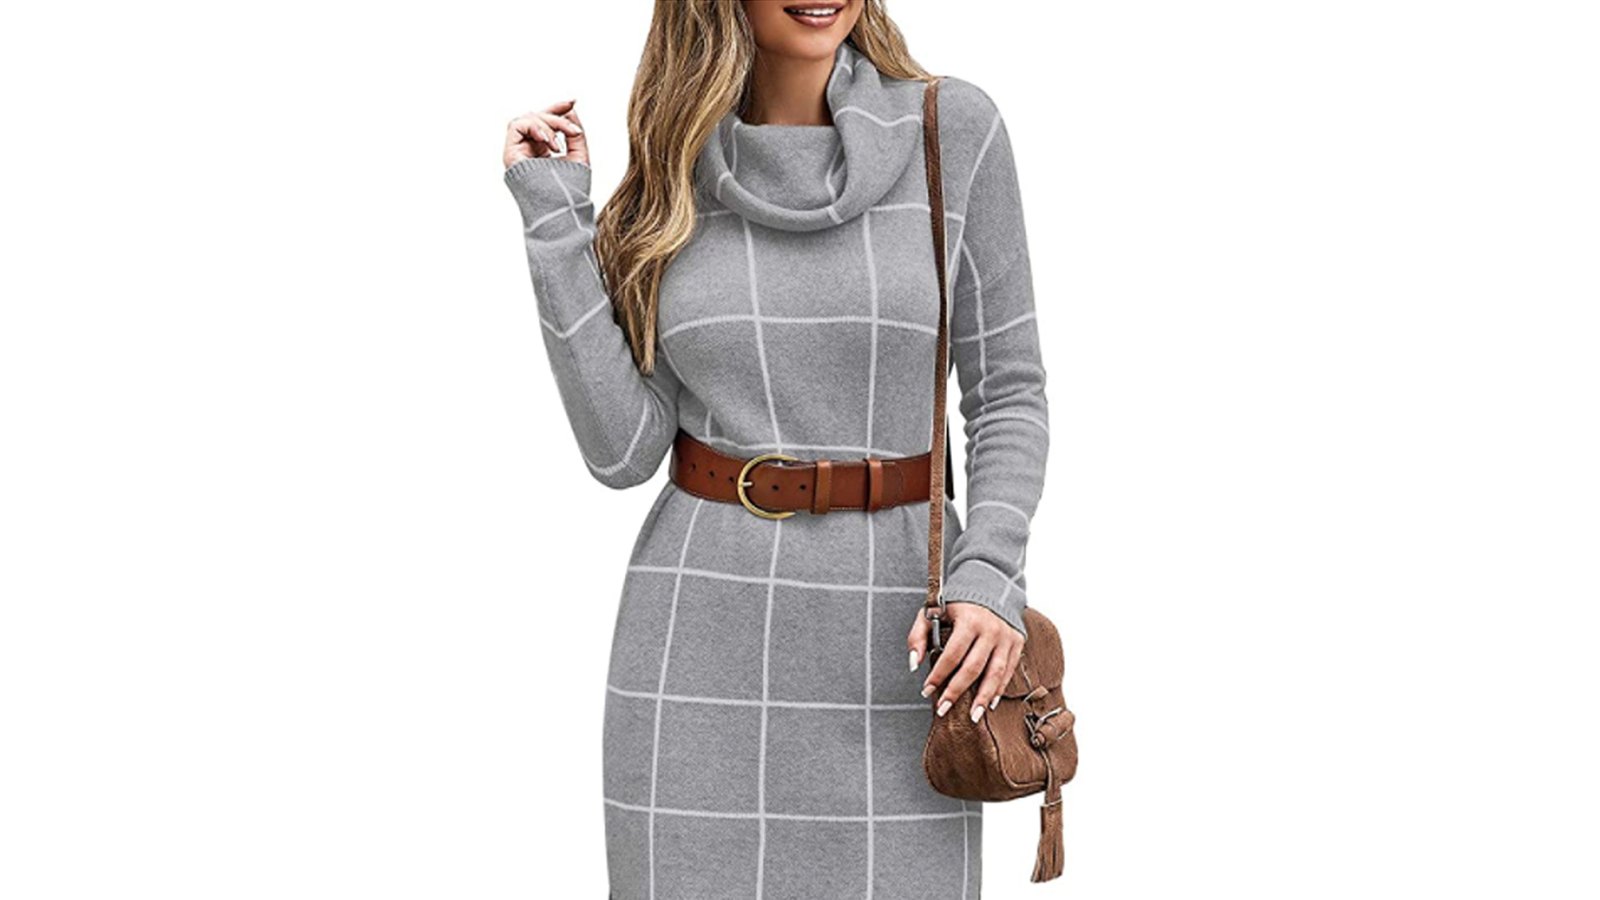 luvamia Women's Casual Turtleneck Knitted Sweater Dress